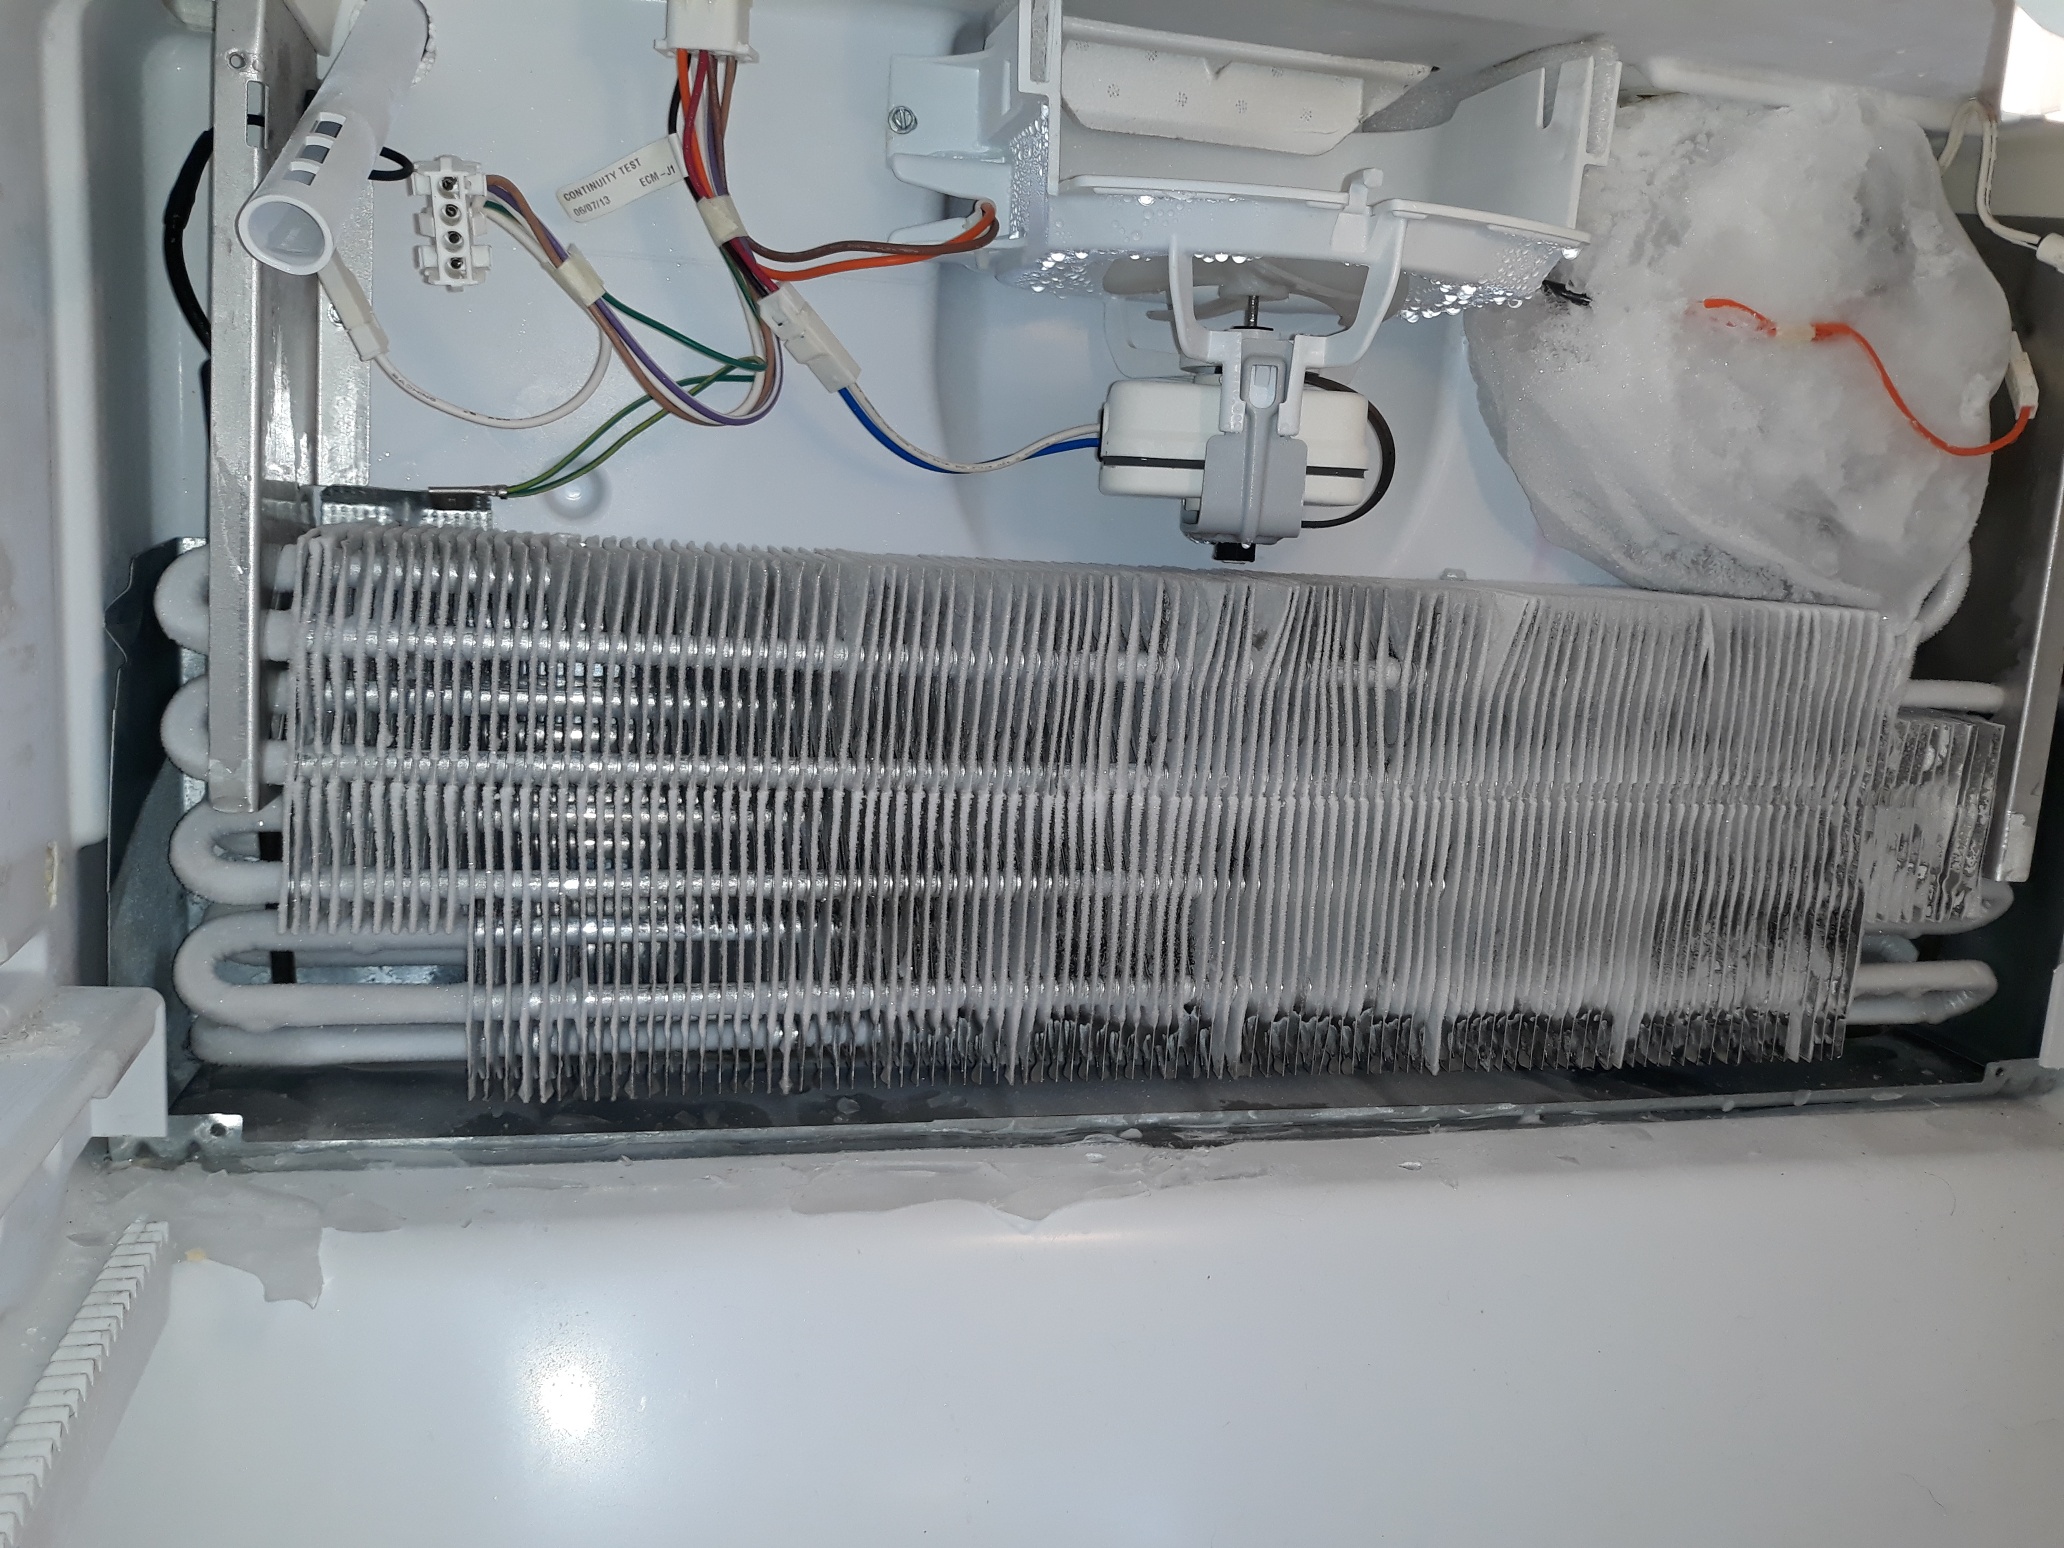 appliance repair refrigerator repair whirlpool refrigerator leaking water and freezing in the bottom ne 30th ct anthony fl 32617